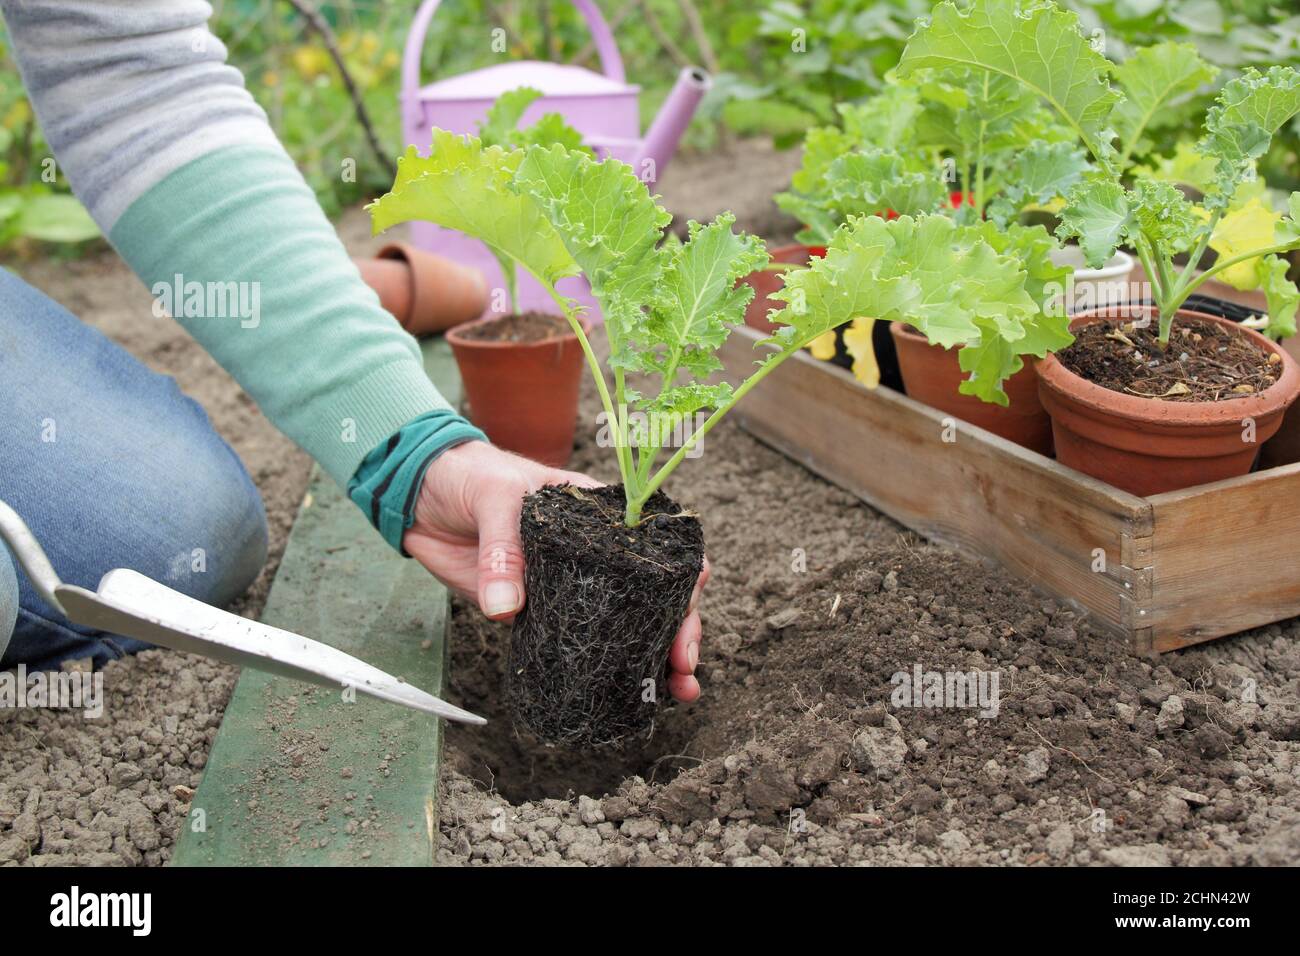 Brassica oleracea 'Dwarf Green Curled'. Planting young green curly kale plants in a back garden veg plot during the Covid pandemic. UK Stock Photo